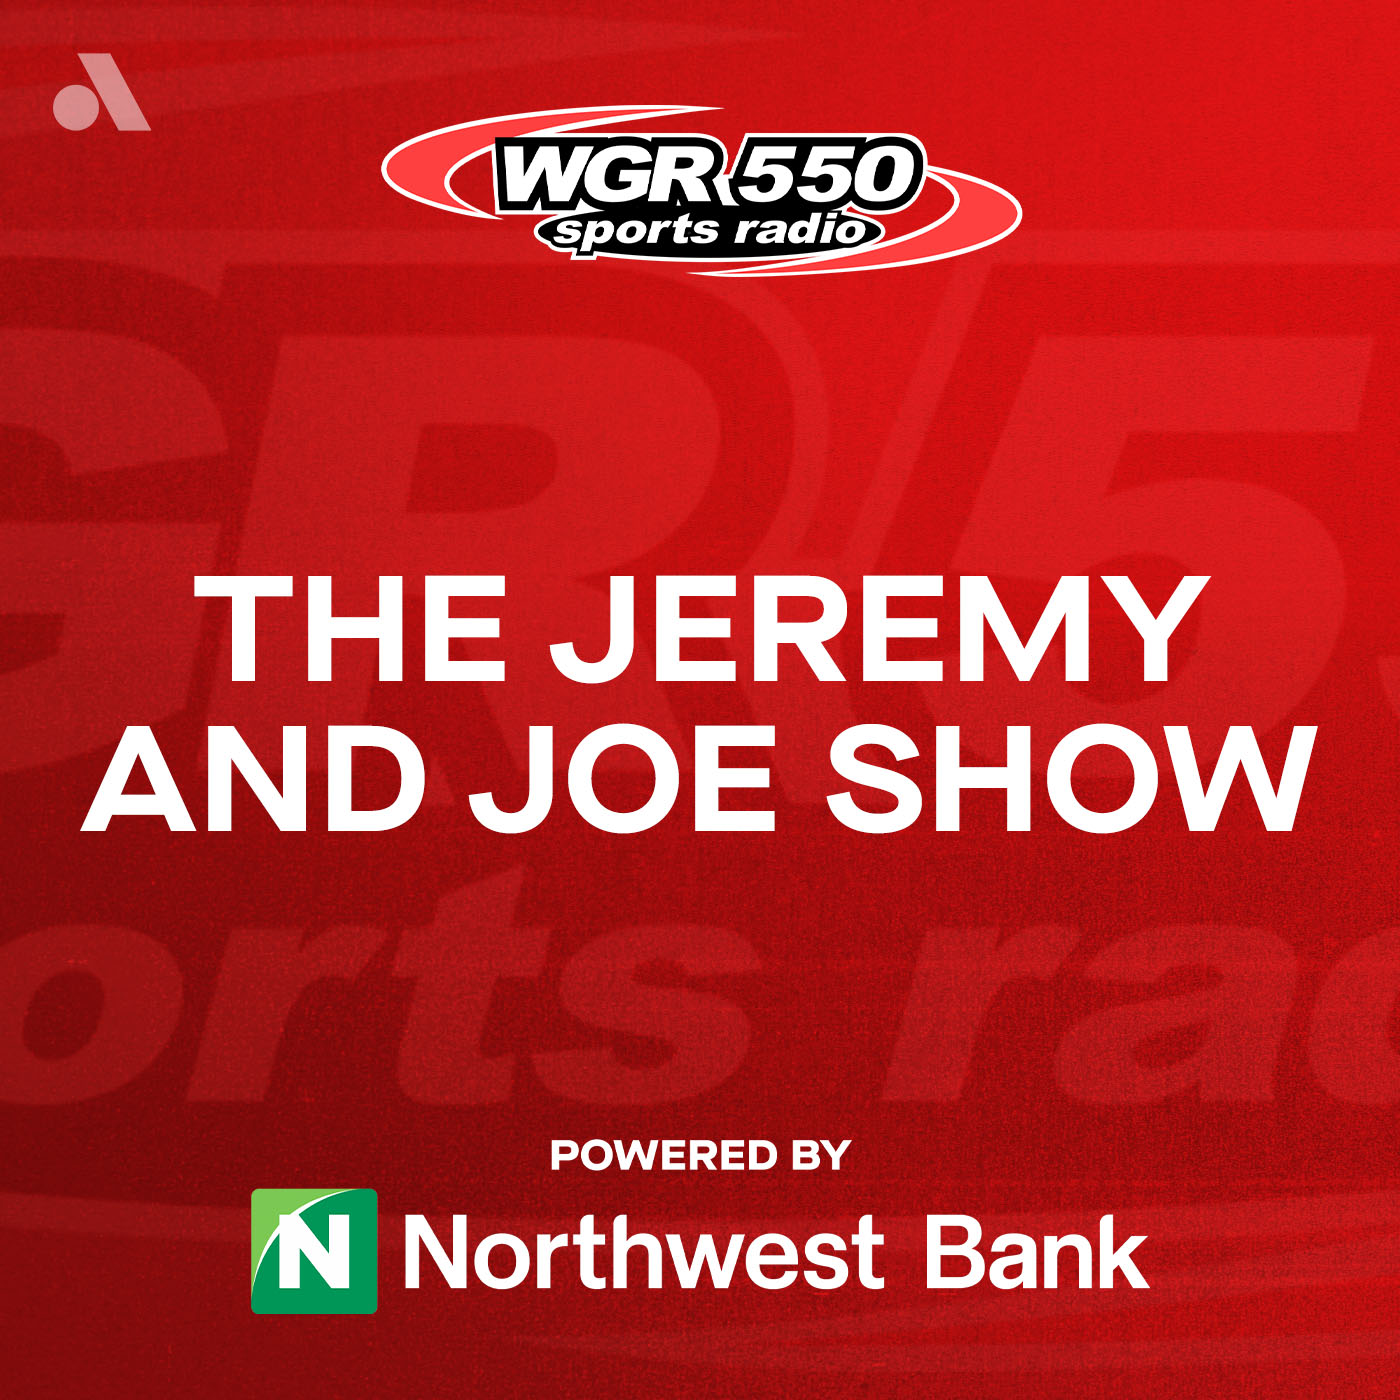 Hour 4 - Joe Yerdon on the NHL Playoffs and Nick the Railbird previewing the Kentucky Derby